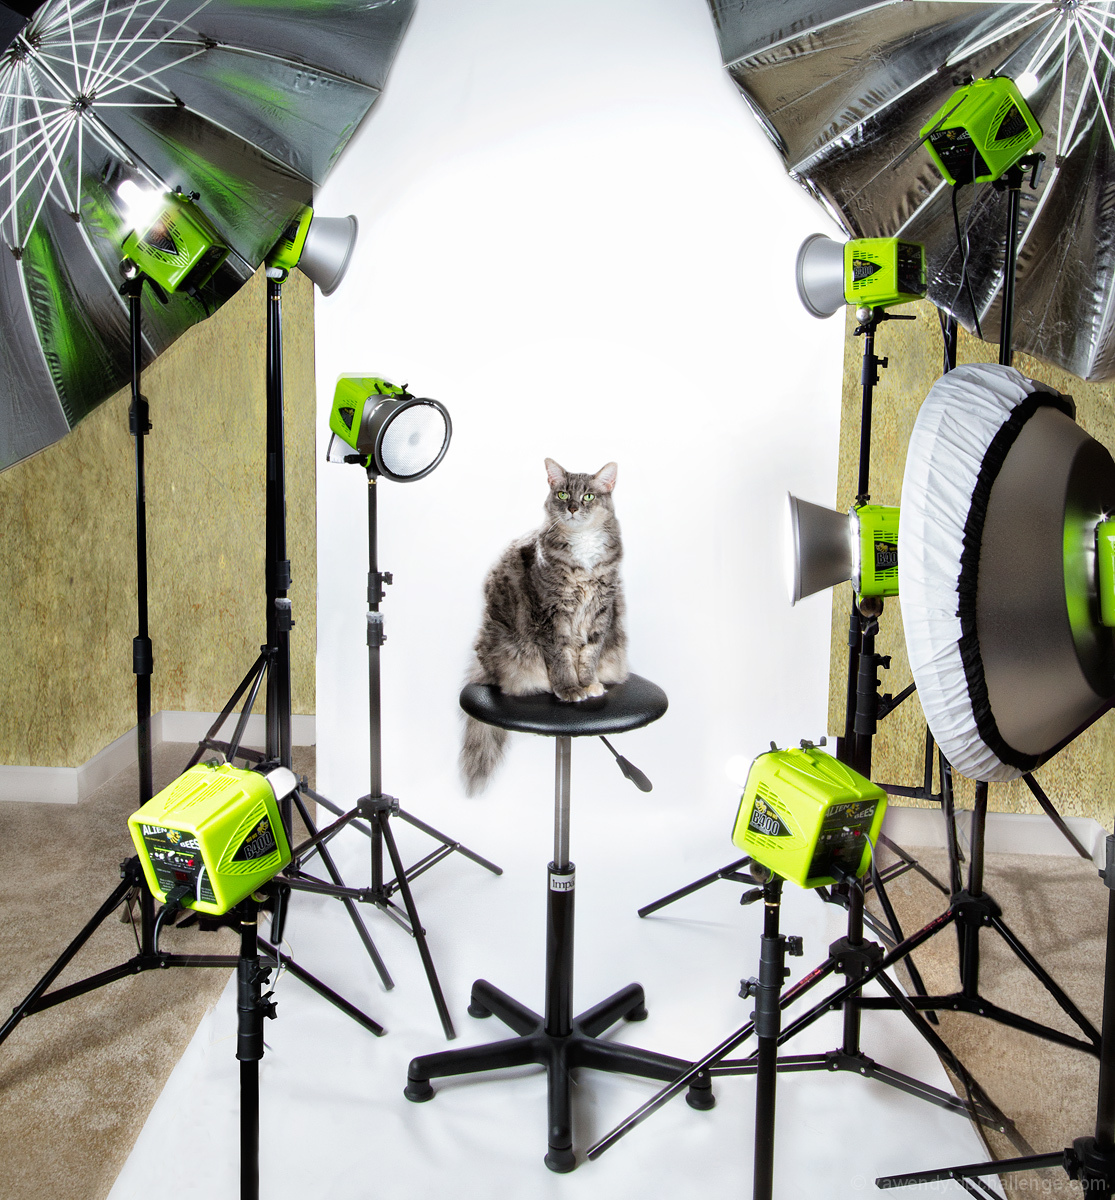 Santa, Could I please have a couple of studio lights?